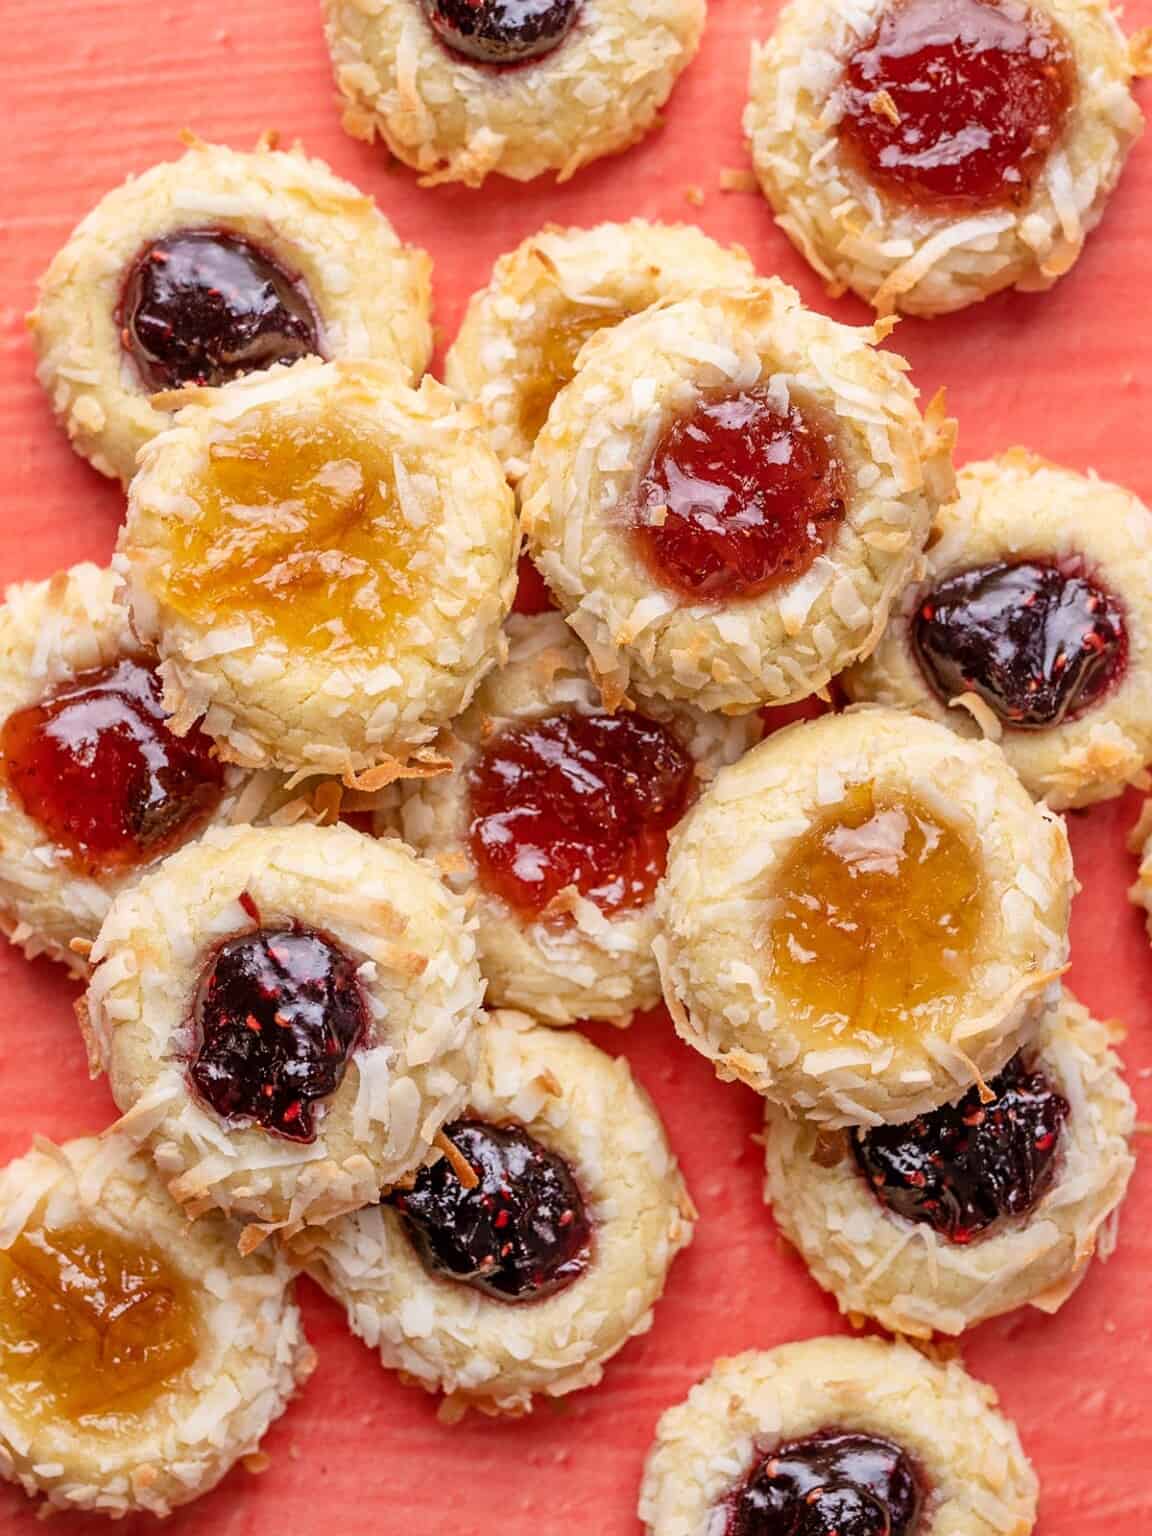 Bake the thumbprint cookies in a 350°F oven for 15 minutes, or just long enough for the edges of the coconut to turn golden brown.